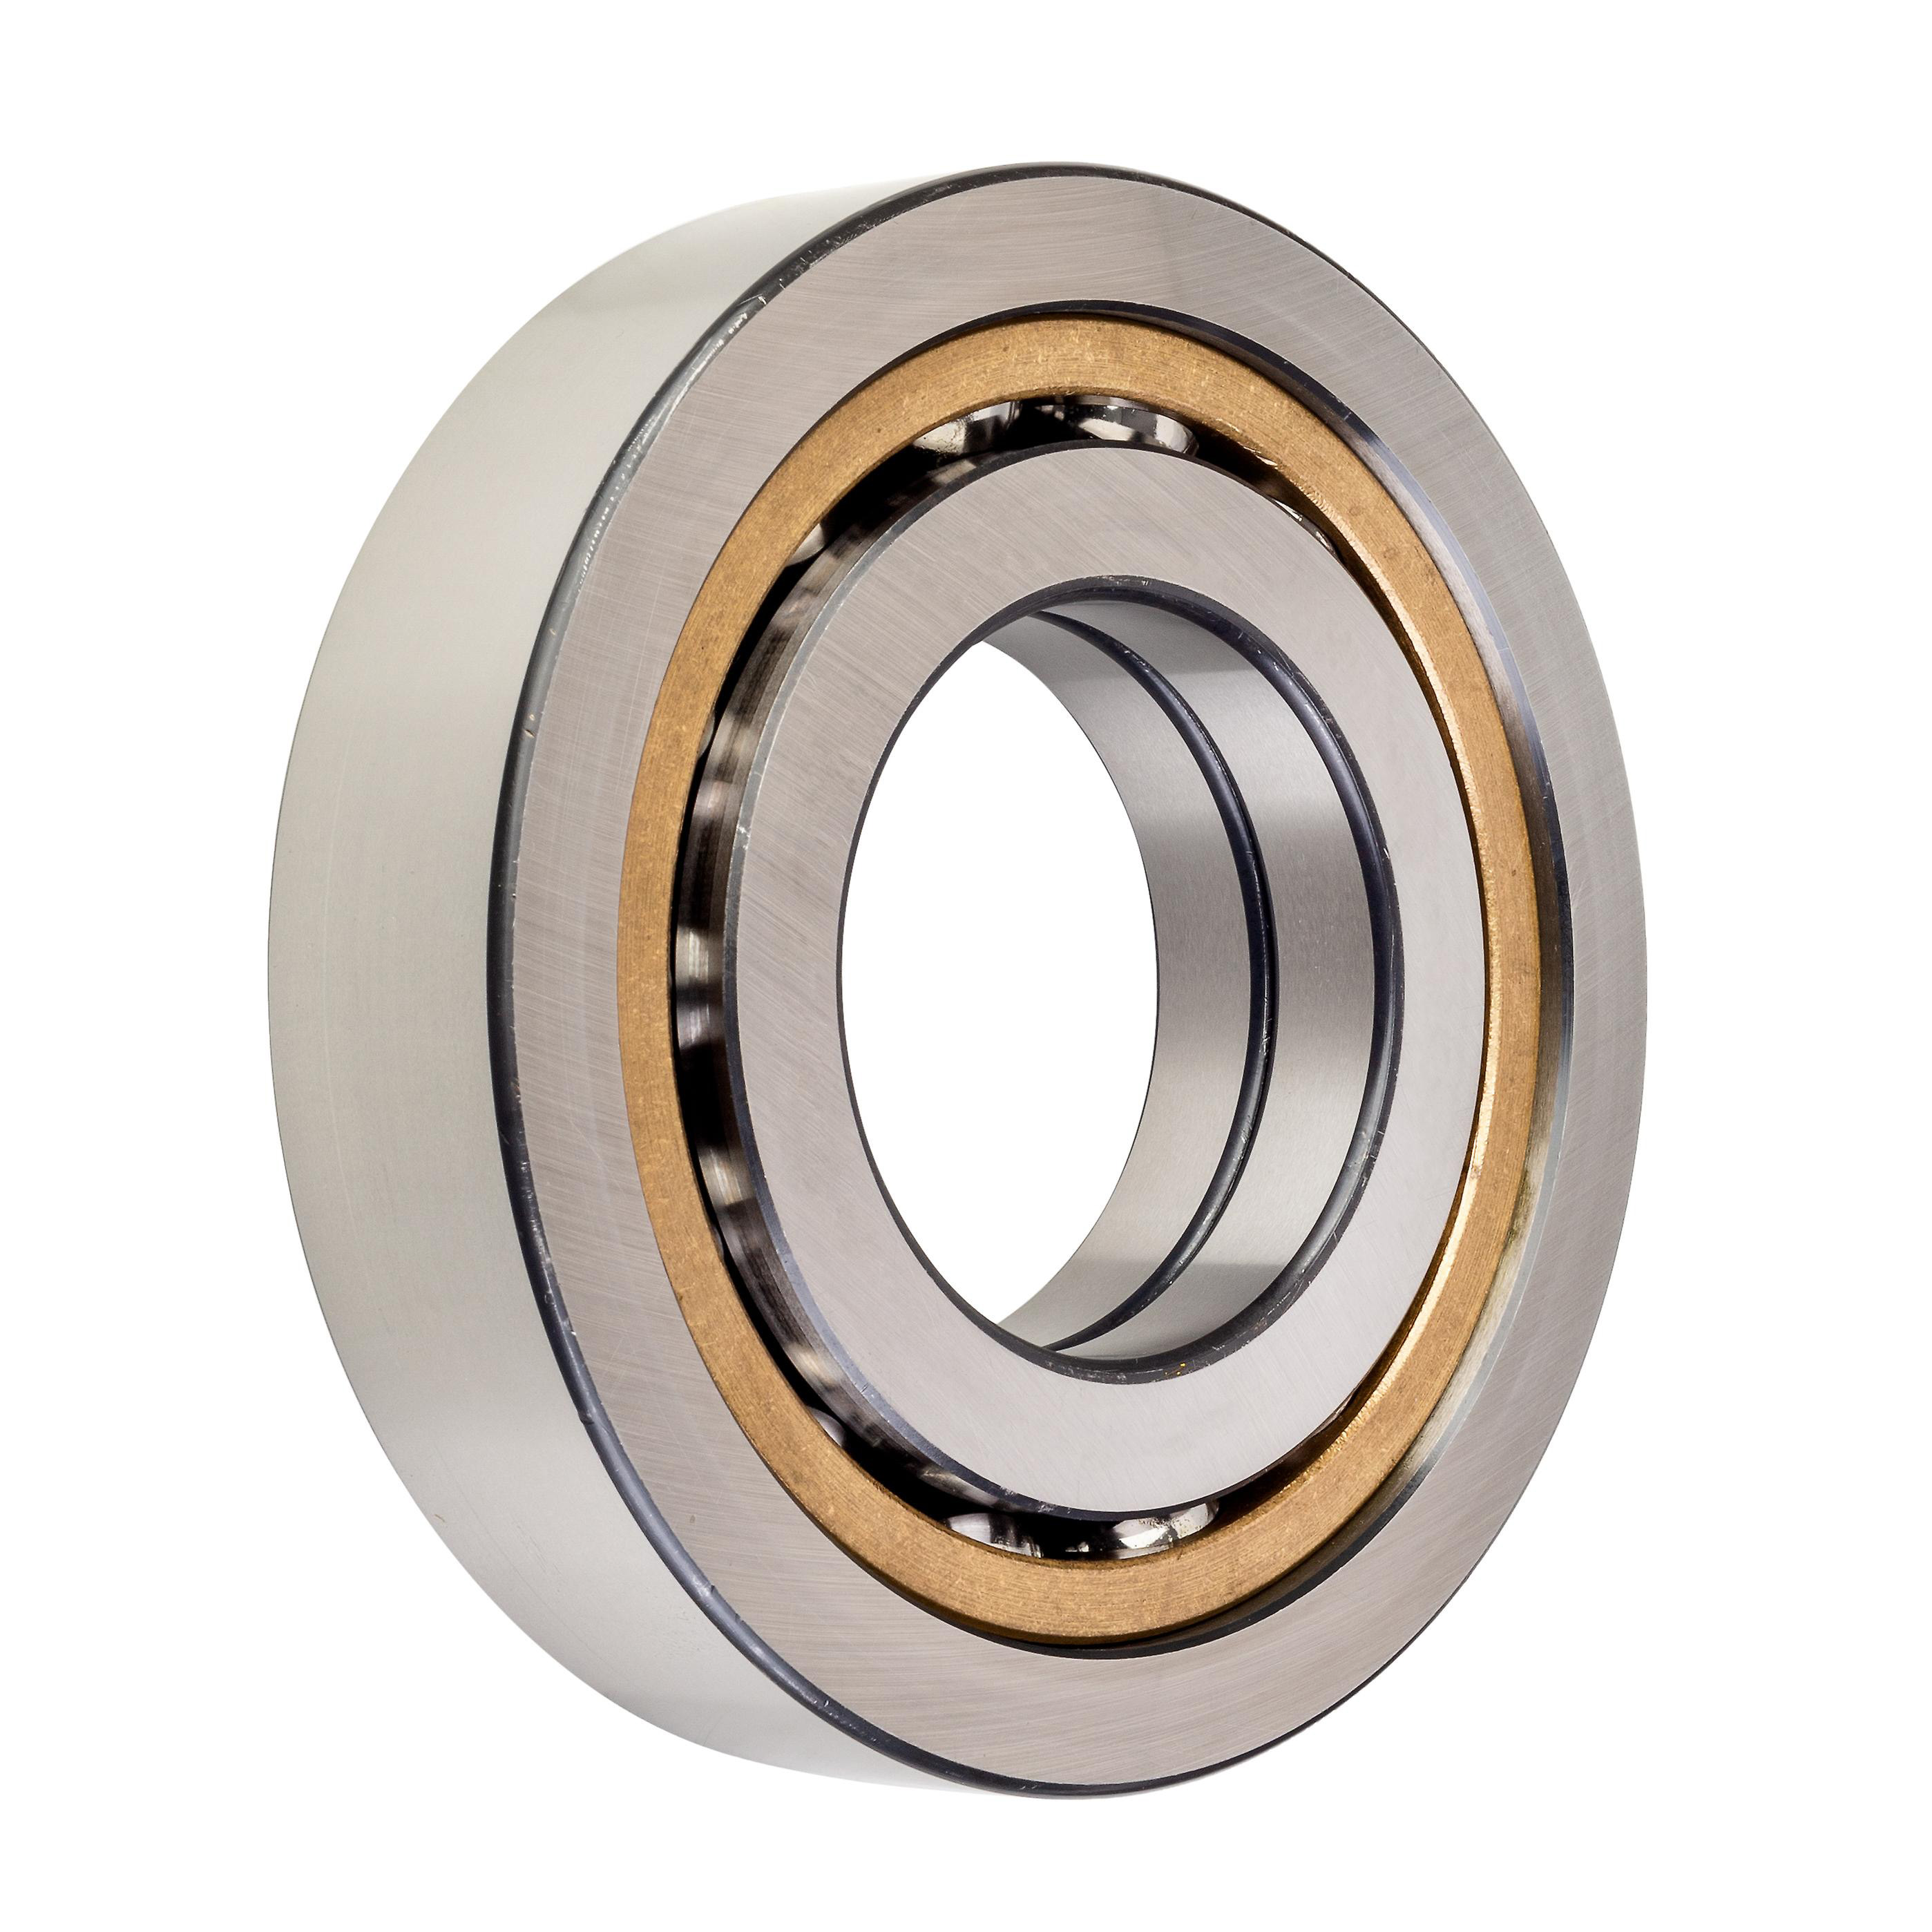 QJ 1244 N2MA Four-Point Contact Angular Contact Ball Bearings (General)